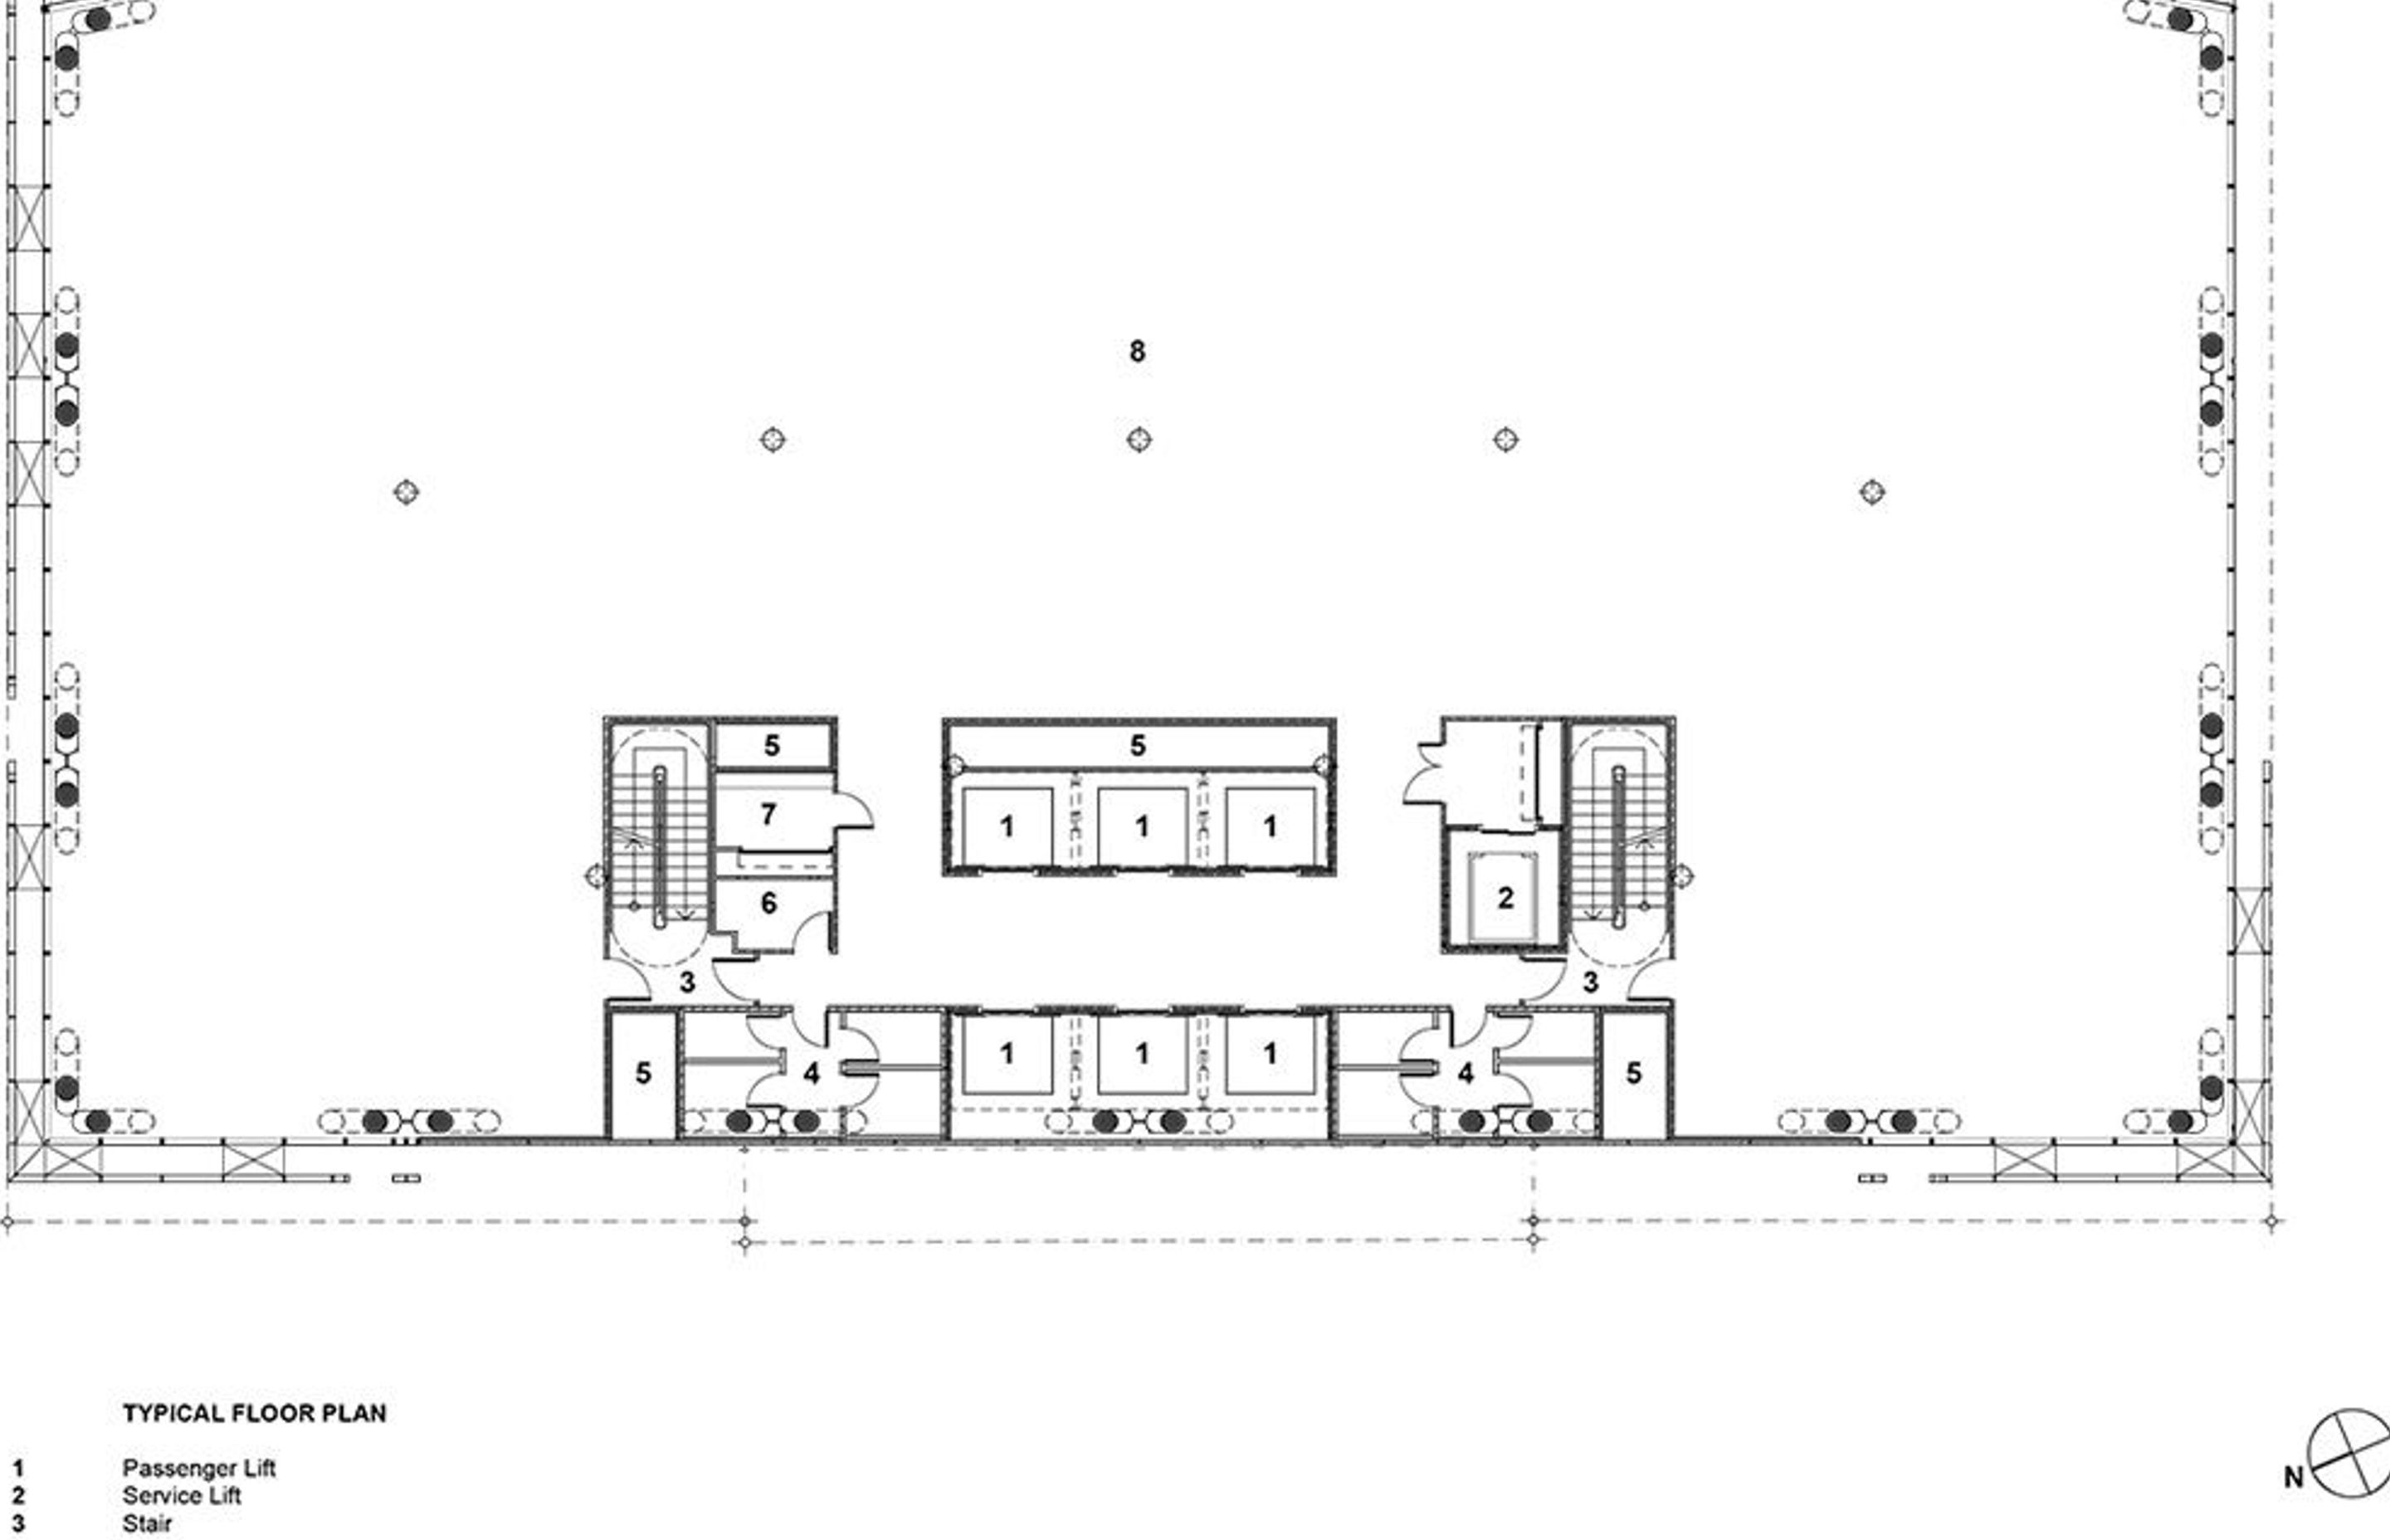 A typical floor plan by Studio Pacific Architecture.